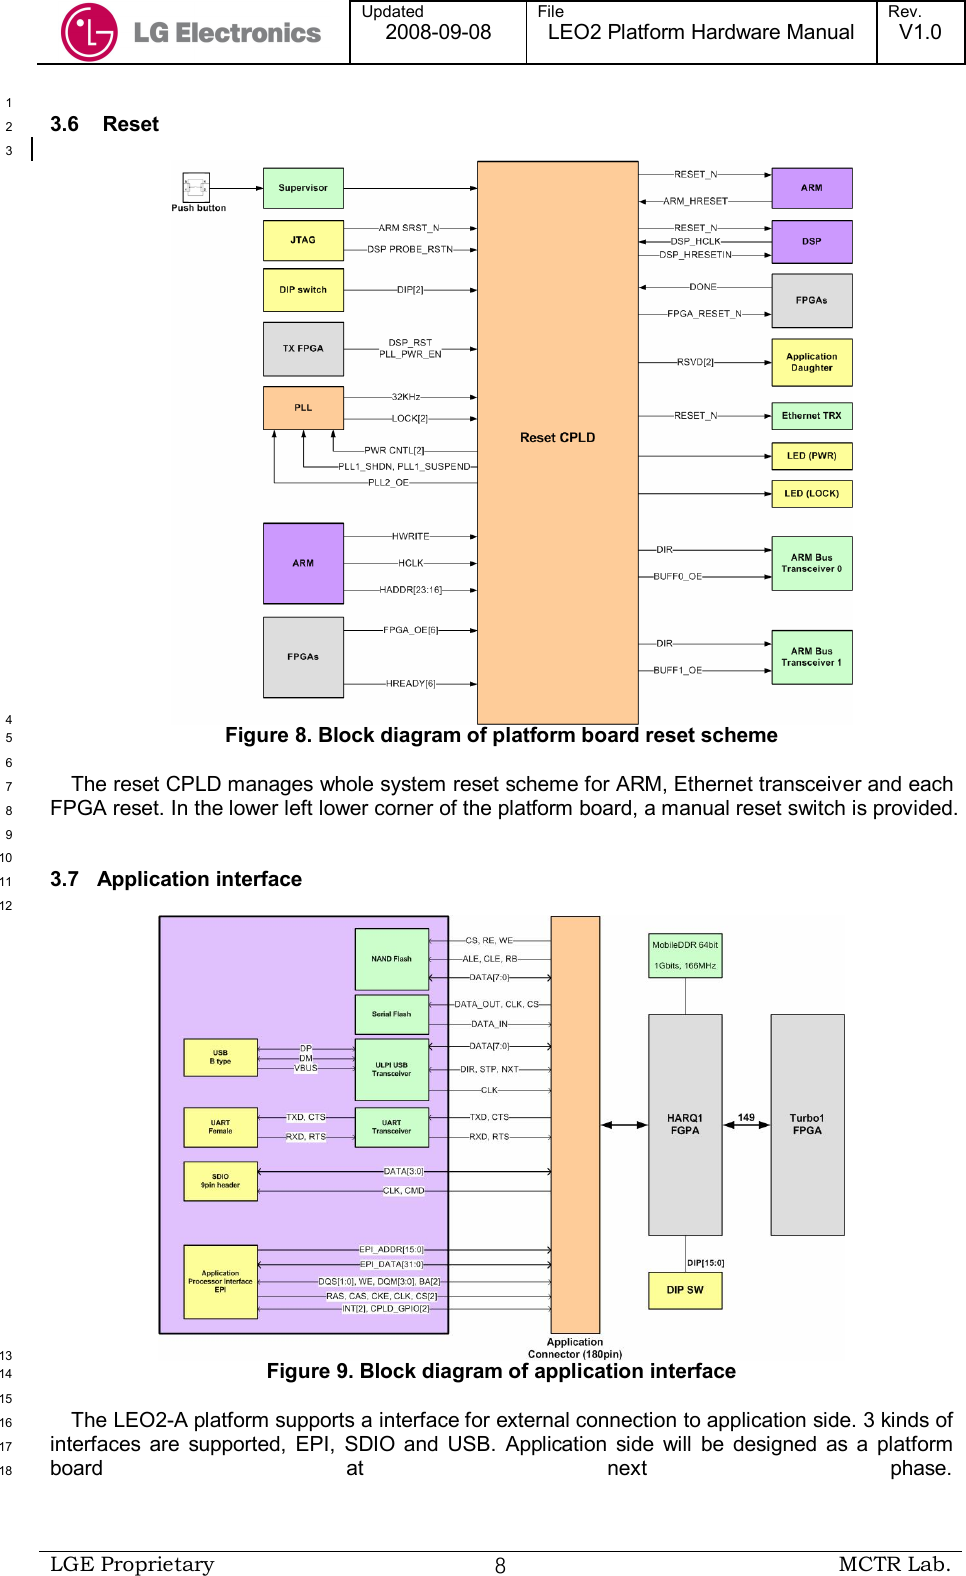  Updated 2008-09-08 File LEO2 Platform Hardware Manual Rev. V1.0   LGE Proprietary  ８ MCTR Lab.   1 3.6    Reset 2  3  4 Figure 8. Block diagram of platform board reset scheme 5  6 The reset CPLD manages whole system reset scheme for ARM, Ethernet transceiver and each 7 FPGA reset. In the lower left lower corner of the platform board, a manual reset switch is provided.  8  9  10 3.7   Application interface 11  12  13 Figure 9. Block diagram of application interface 14  15 The LEO2-A platform supports a interface for external connection to application side. 3 kinds of 16 interfaces  are  supported,  EPI,  SDIO  and  USB.  Application  side  will  be  designed  as  a  platform 17 board  at  next  phase.18 